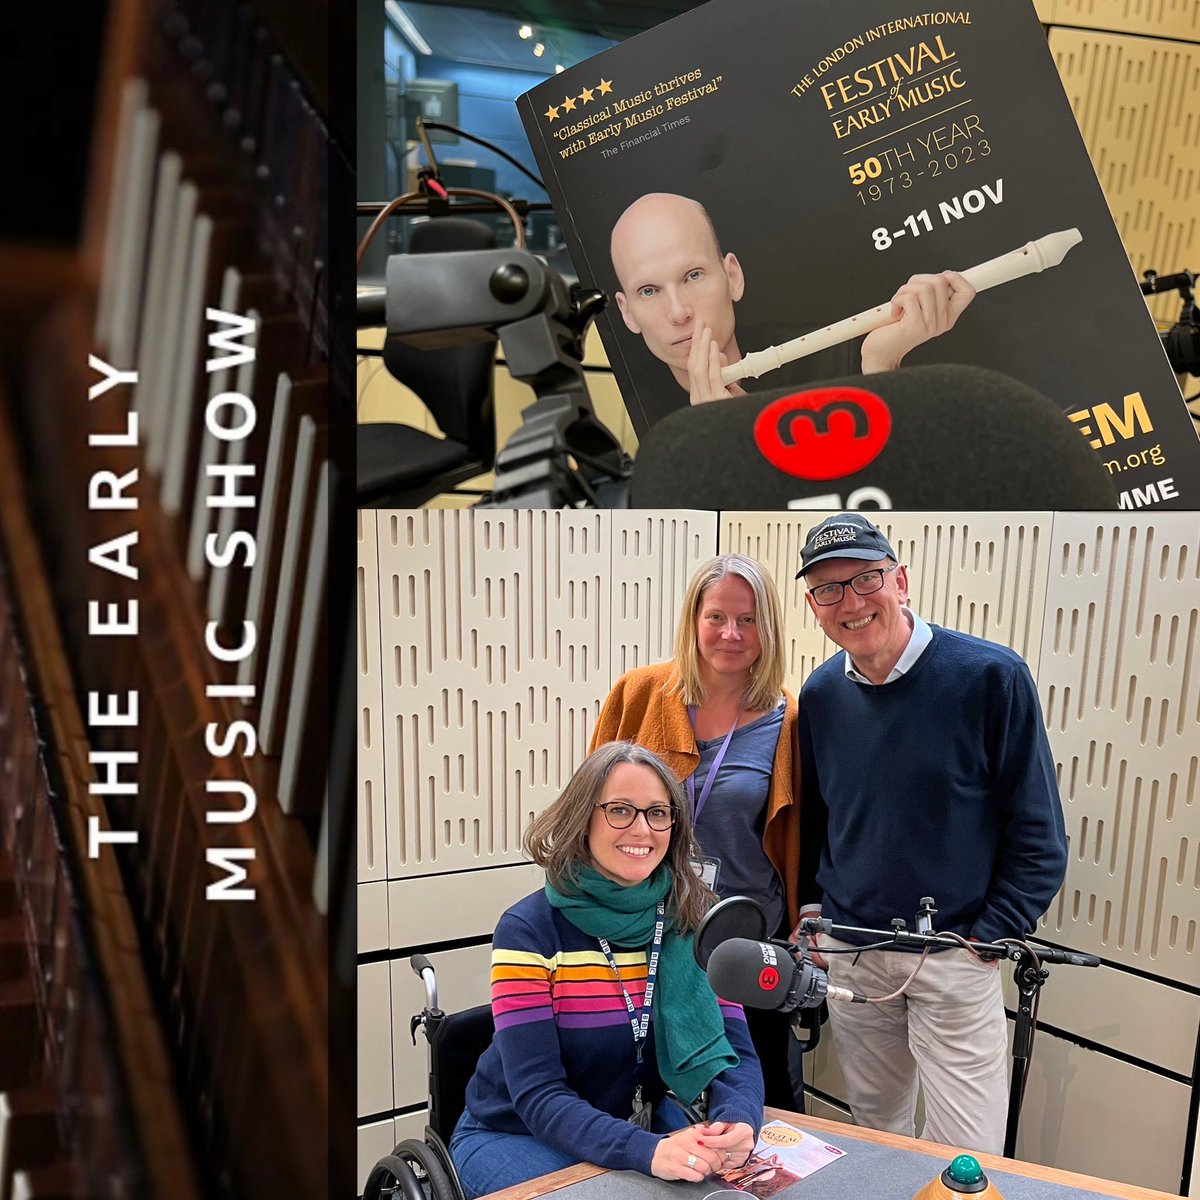 On today’s edition of The Early Music Show @LIFEMofficial Festival Director @BawdseyChris & Producer @annbarkway join me to chat about the highlights of last year’s 50th anniversary season - inc performances from @erikbosgraaf & Jane Chapman. 5pm @BBCRadio3 & @BBCSounds